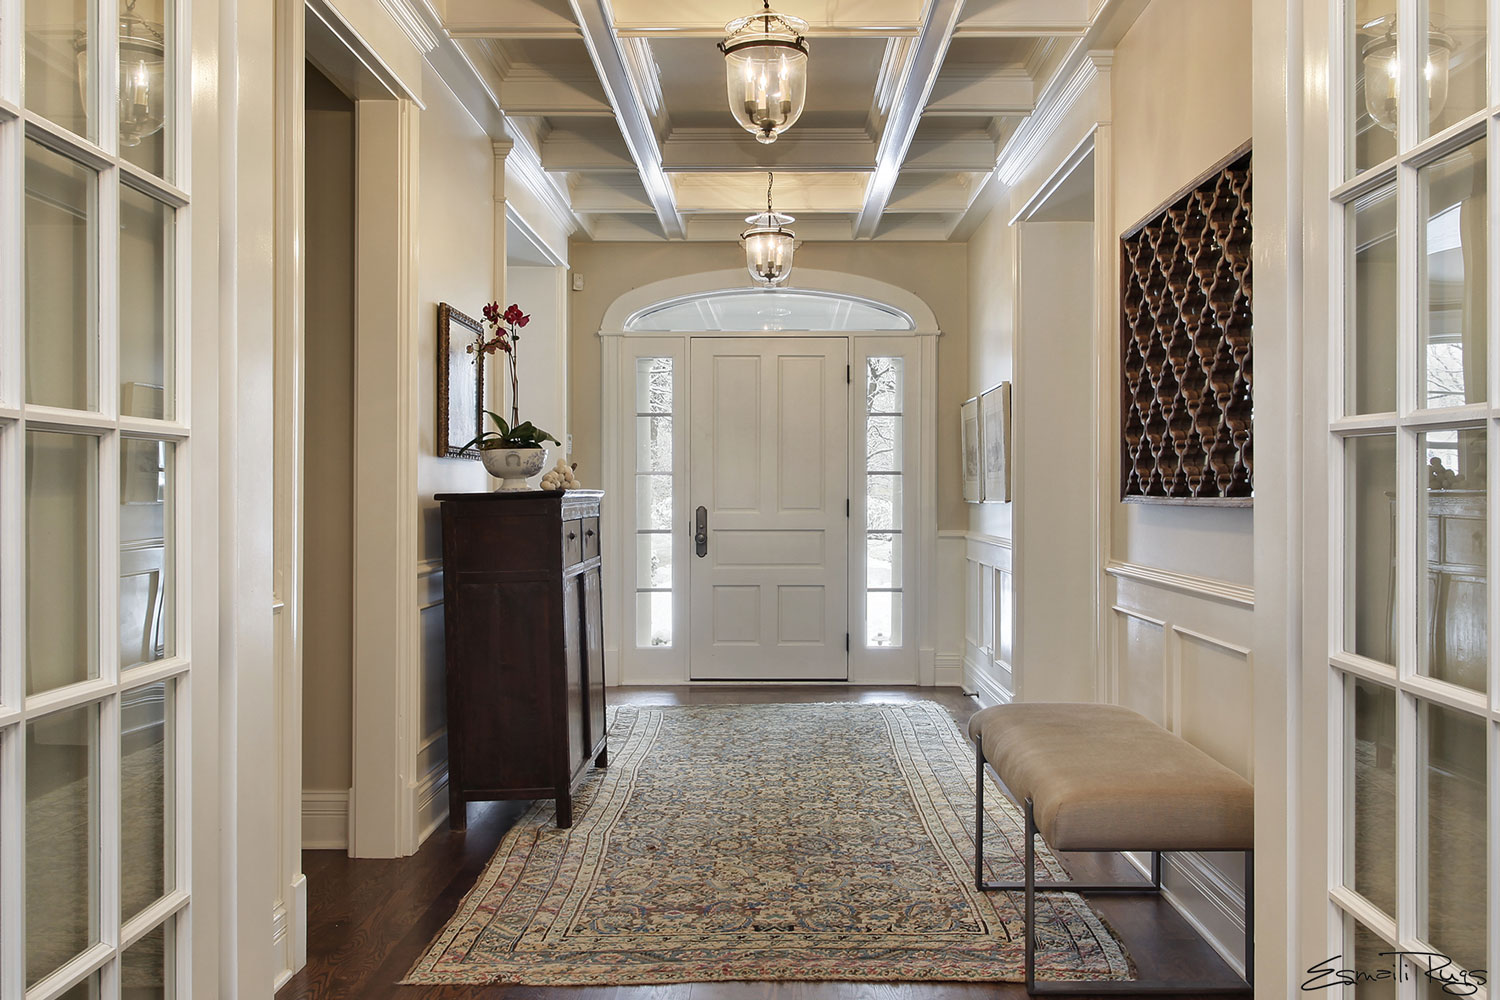 Persian Rugs Add Elegance to Pinedale Estate Home